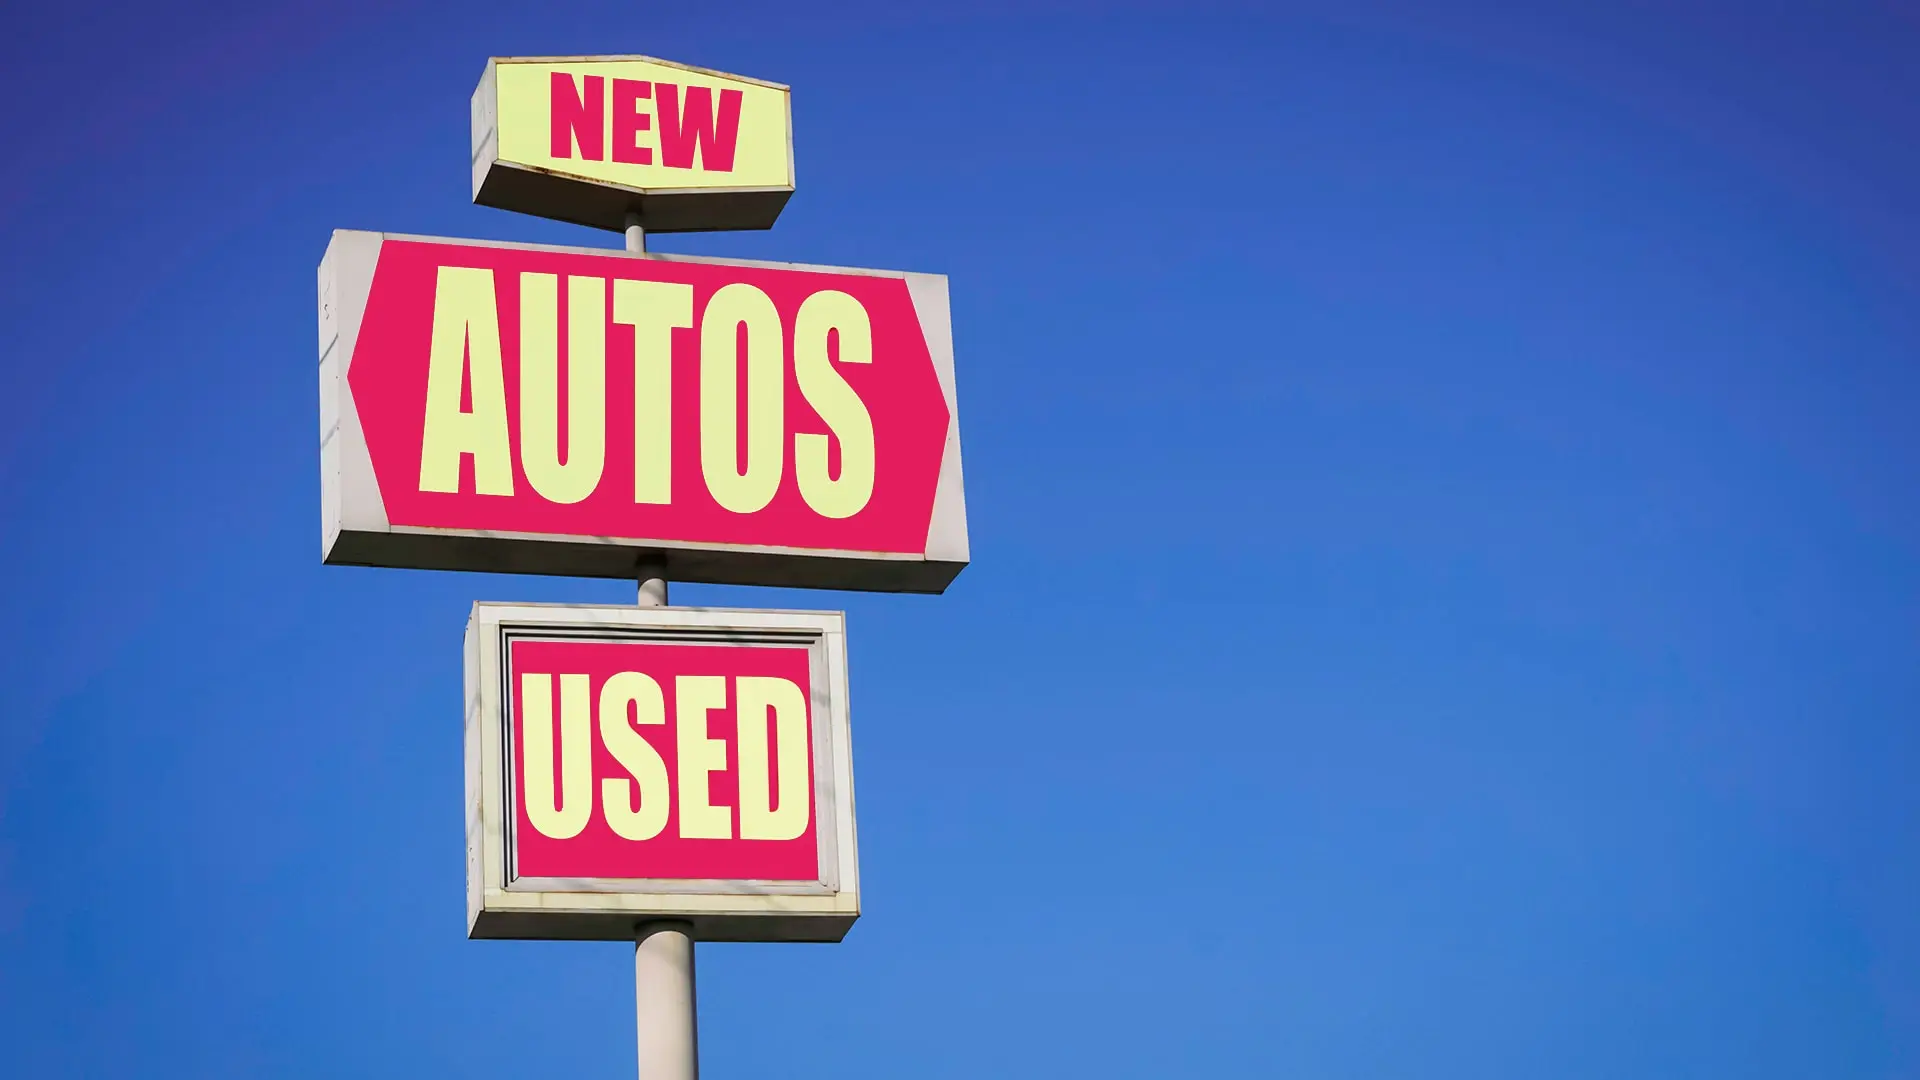 used car lot sign